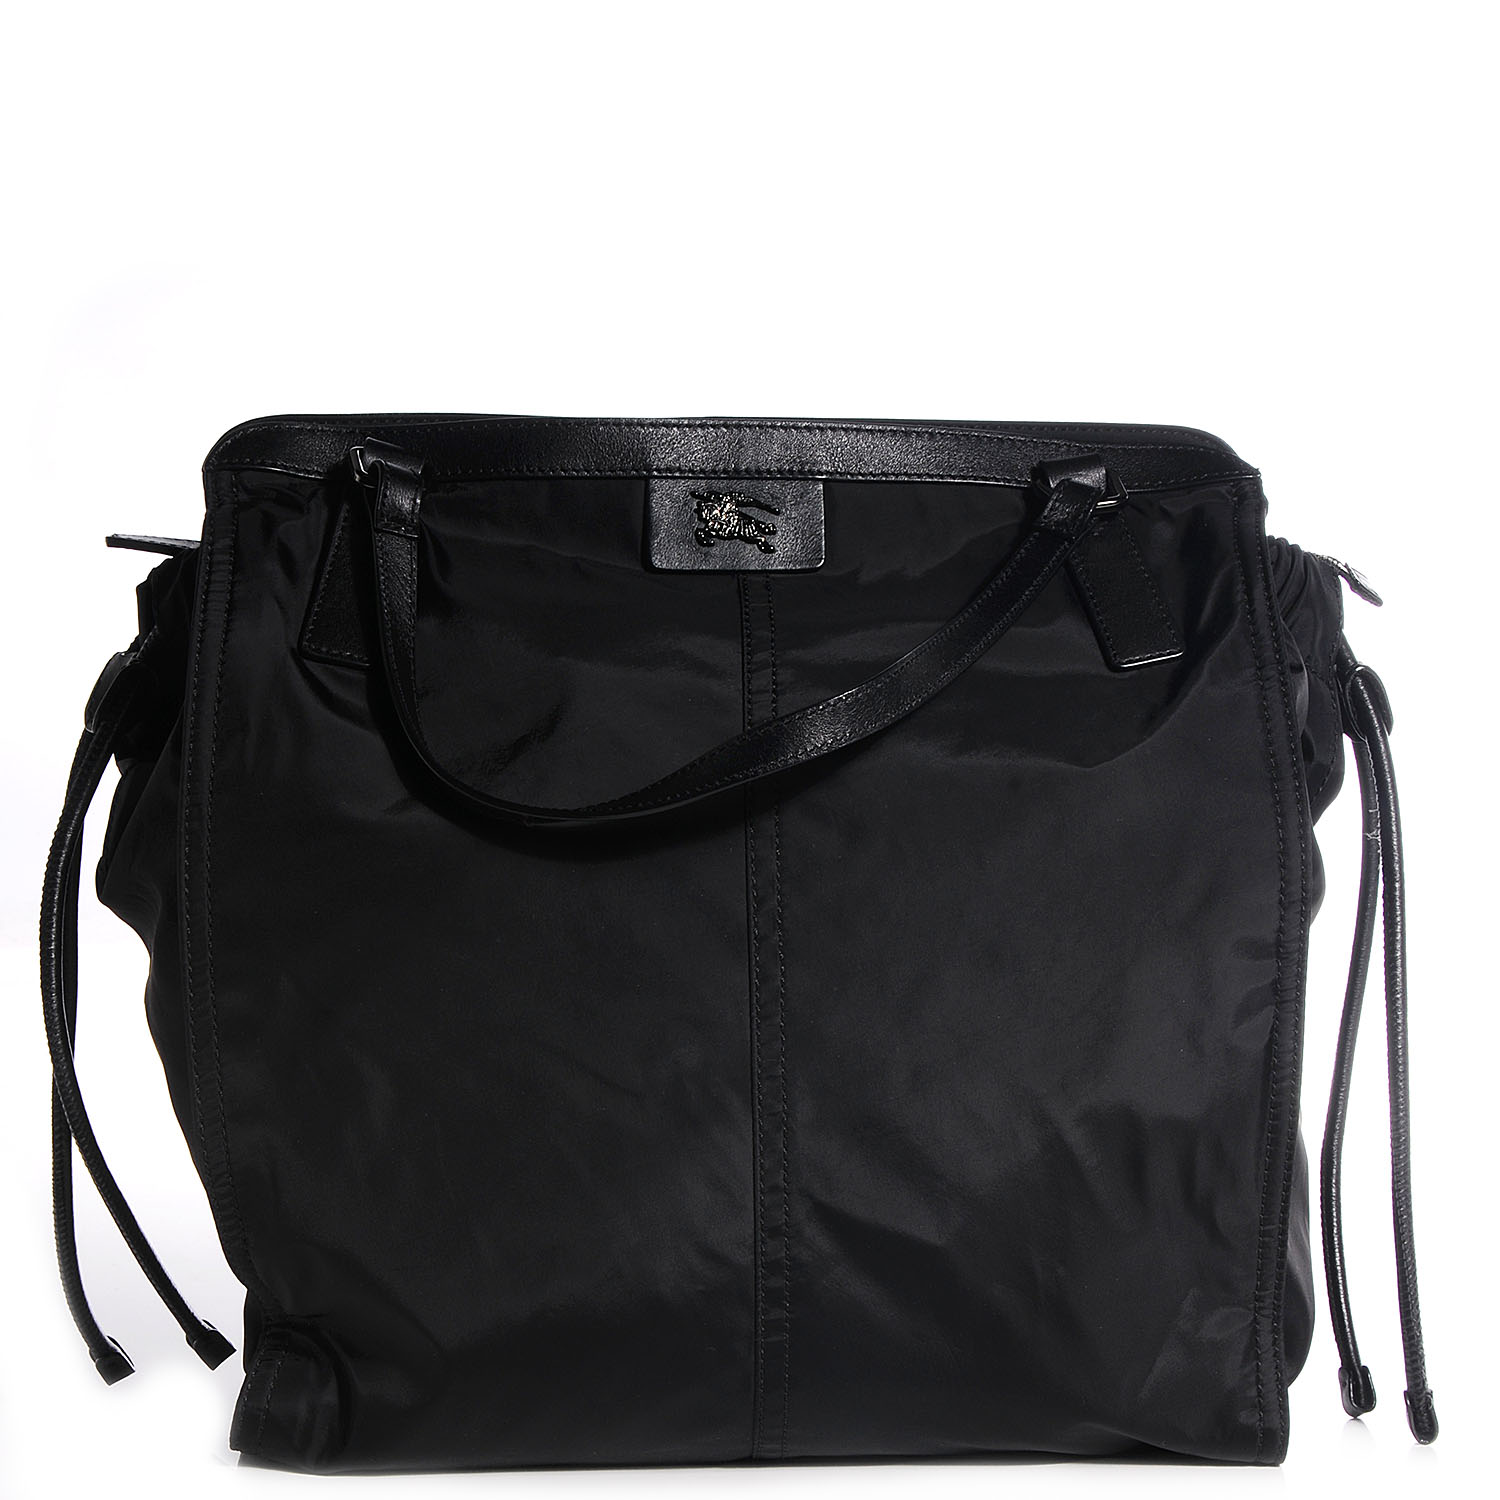 BURBERRY Nylon Buckleigh Packable Tote Black 78841